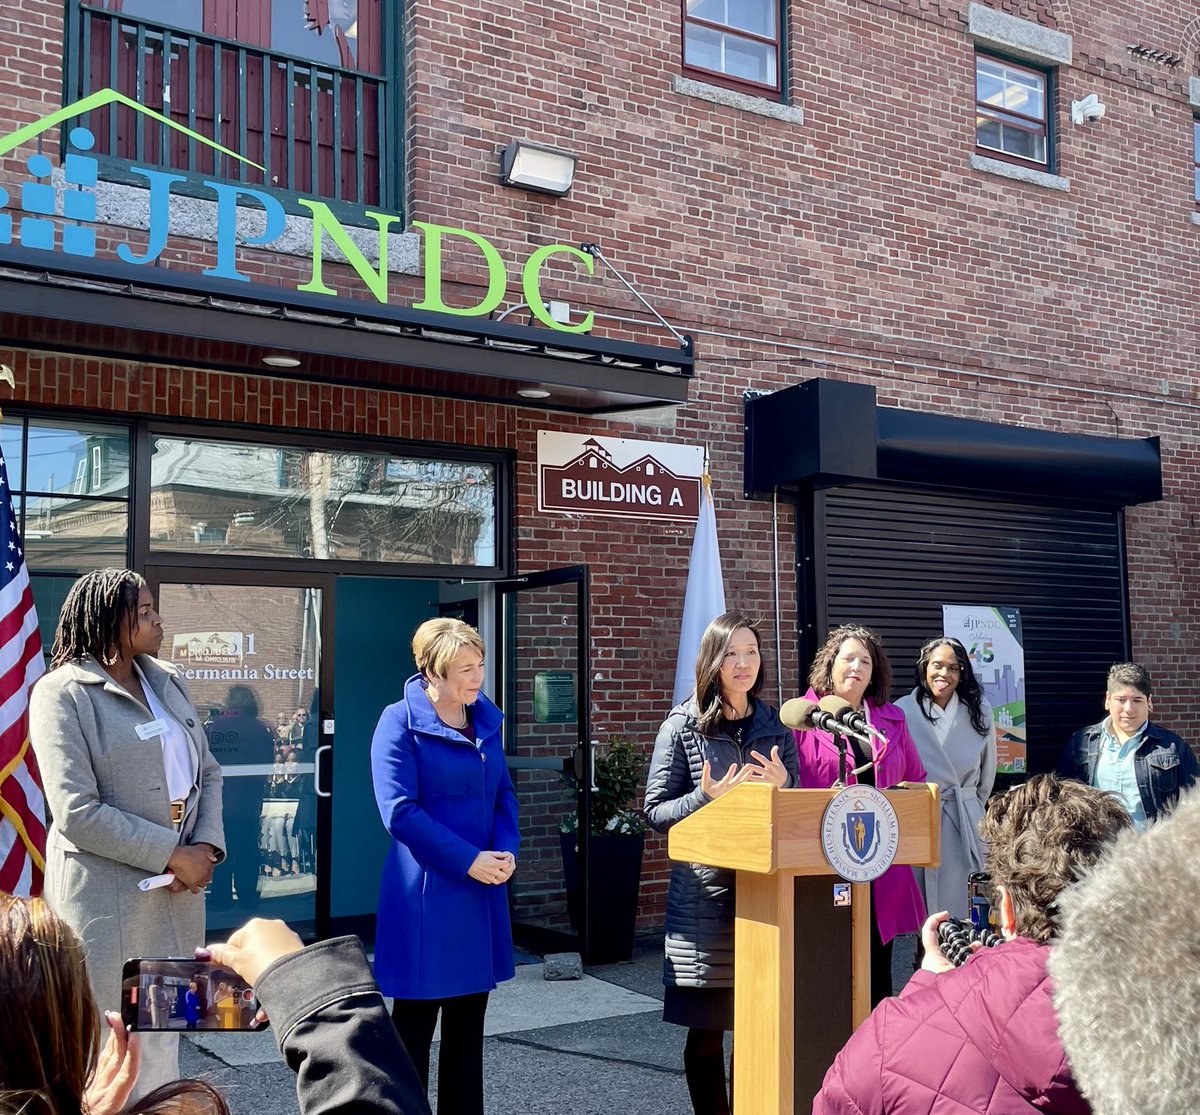 We are proud to be a partner with @JP_NDC and congratulate them on their funding award for permanent supportive senior housing! Thanks @MayorWu and @MassGov for your leadership. 